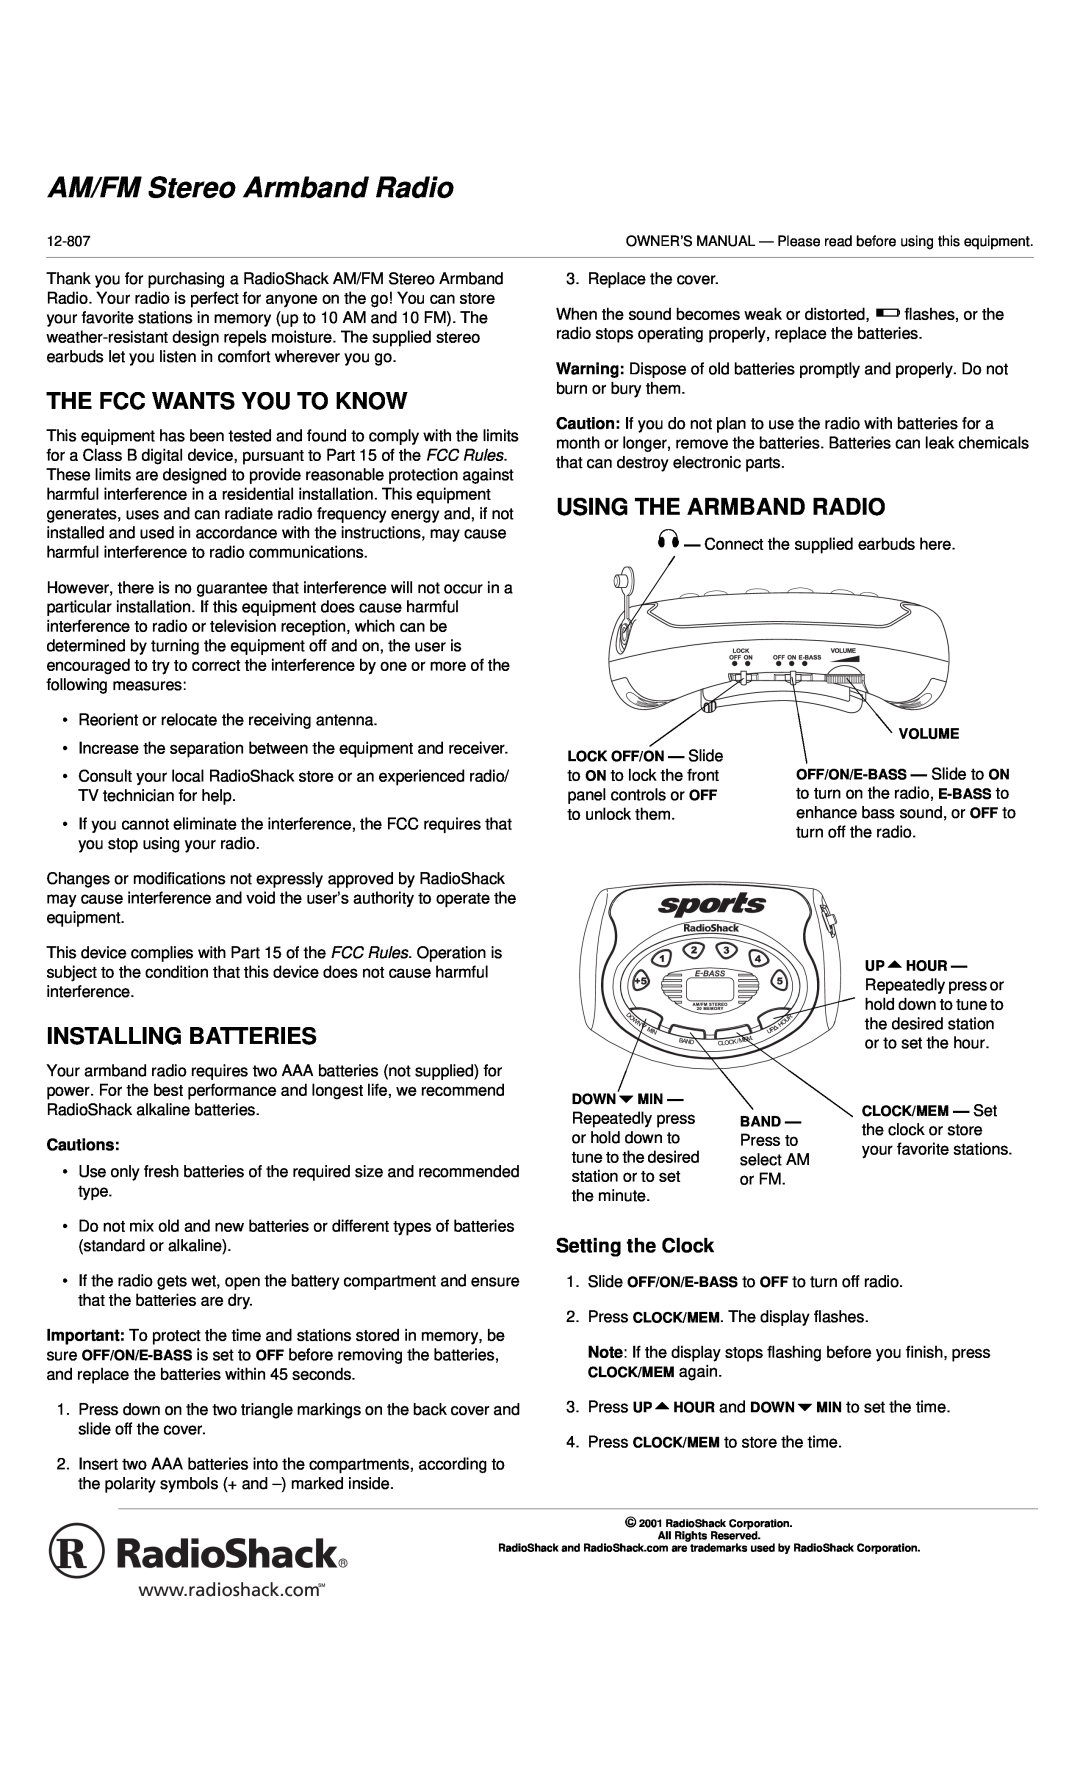 Radio Shack 12-807 owner manual The Fcc Wants You To Know, Using The Armband Radio, Installing Batteries, Cautions 